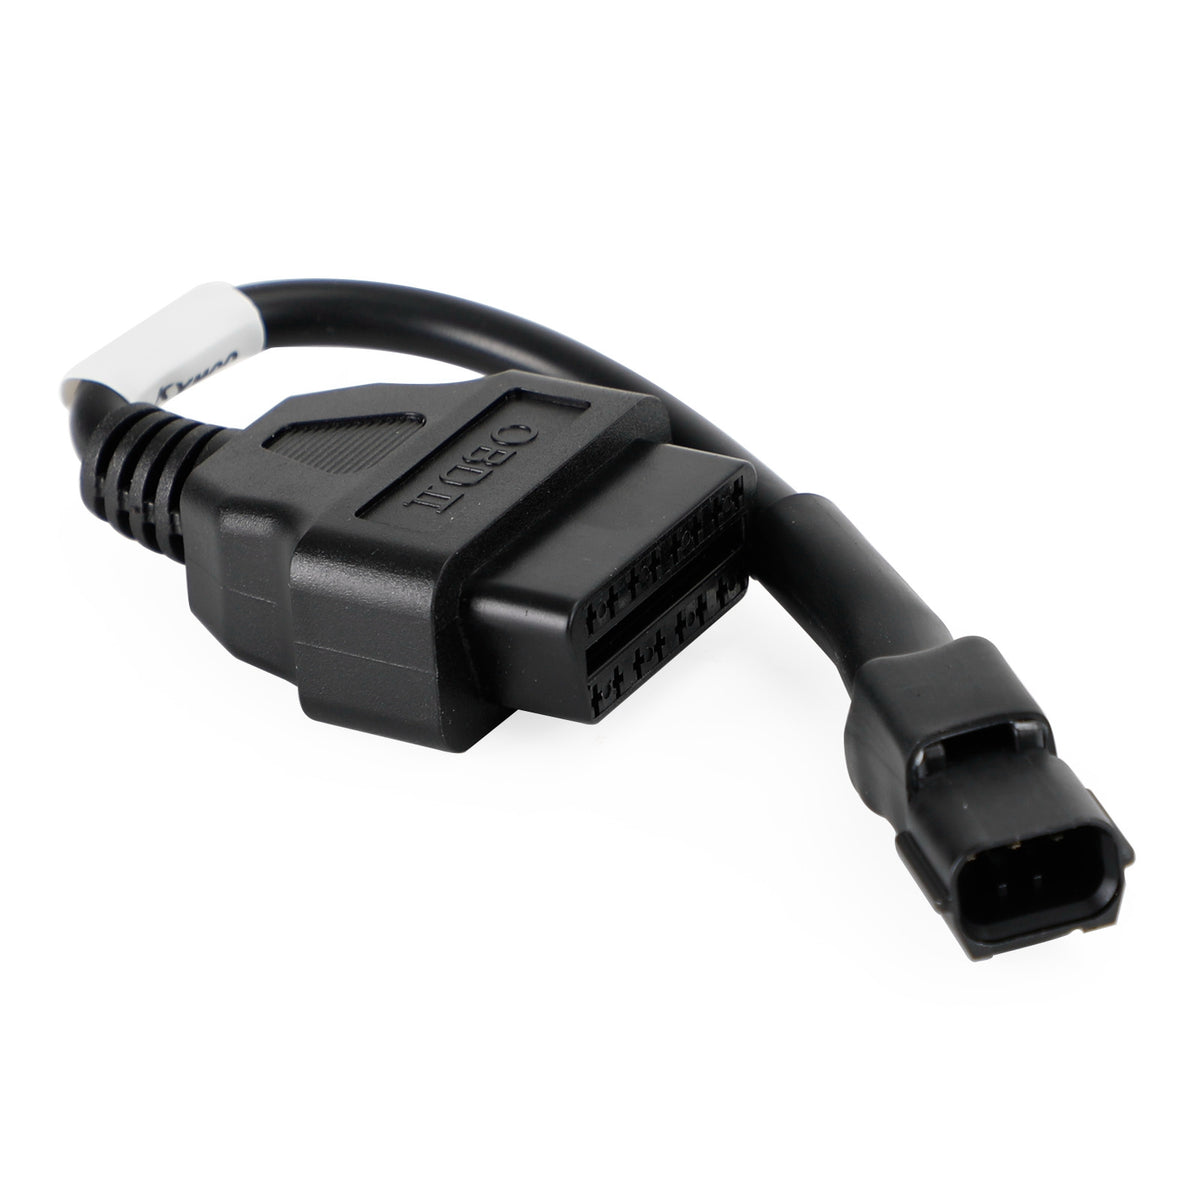 Motorcycle 3 Pin To 16 Pin OBD Adapter OBD2 Diagnostic Cable Connector For KYMCO Generic